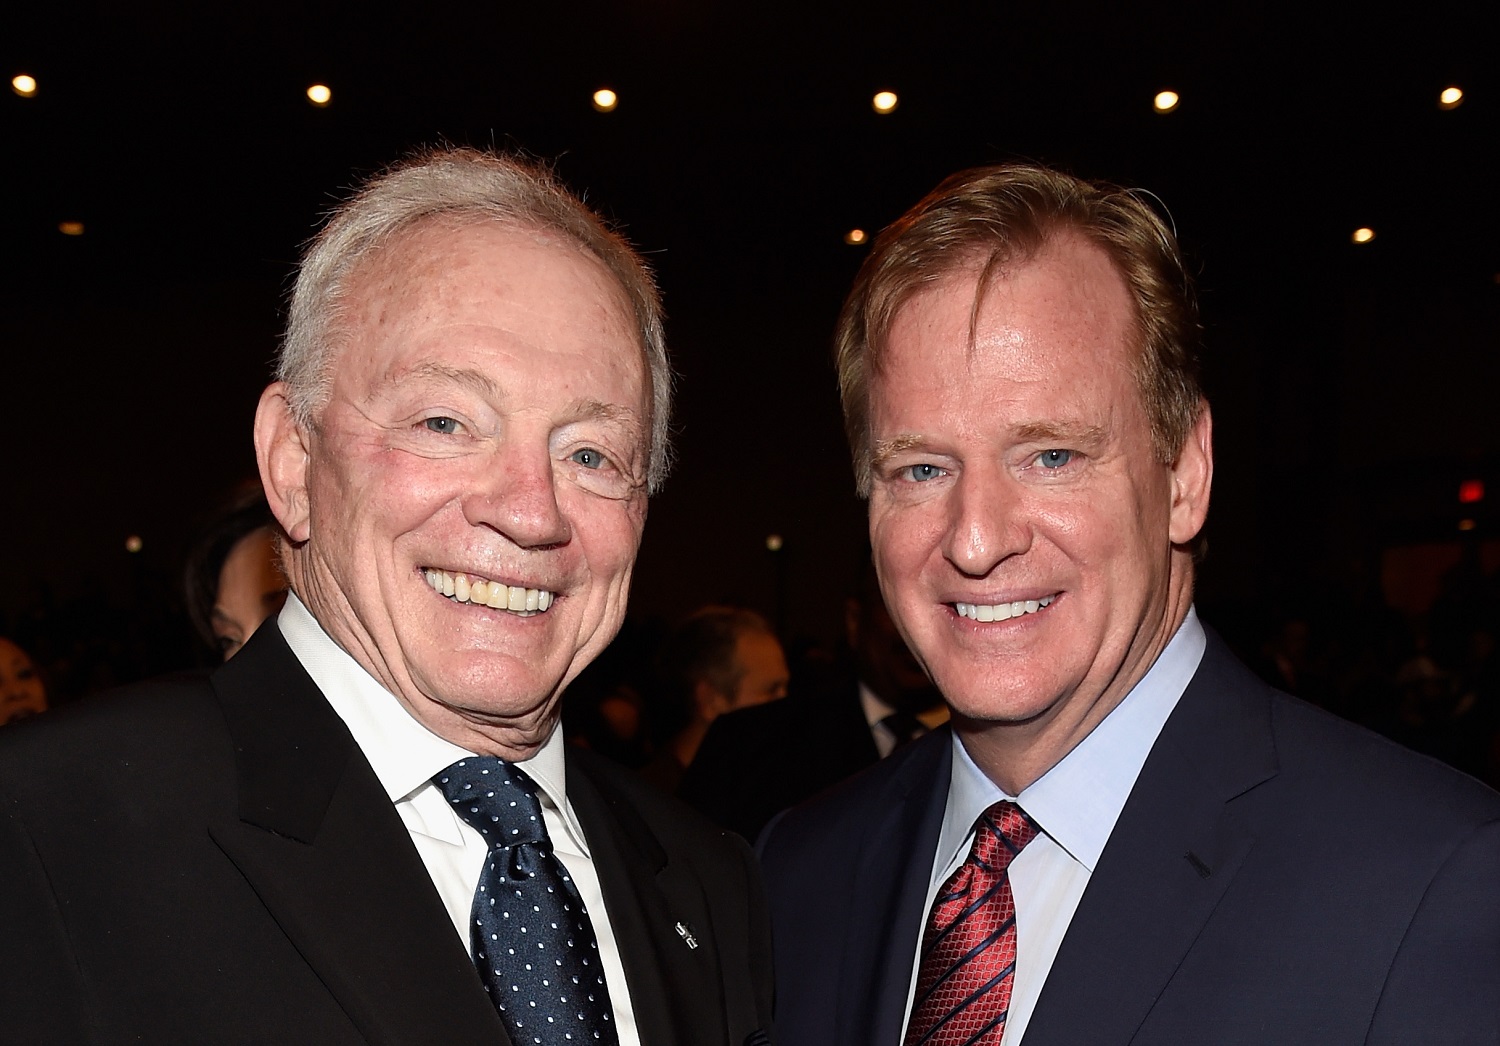 Dallas Cowboys owner Jerry Jones and NFL commissioner Roger Goodell attend the 4th annual NFL Honors at Phoenix Convention Center on Jan. 31, 2015, in Phoenix, Arizona. | Kevin Mazur/WireImage via Getty Images